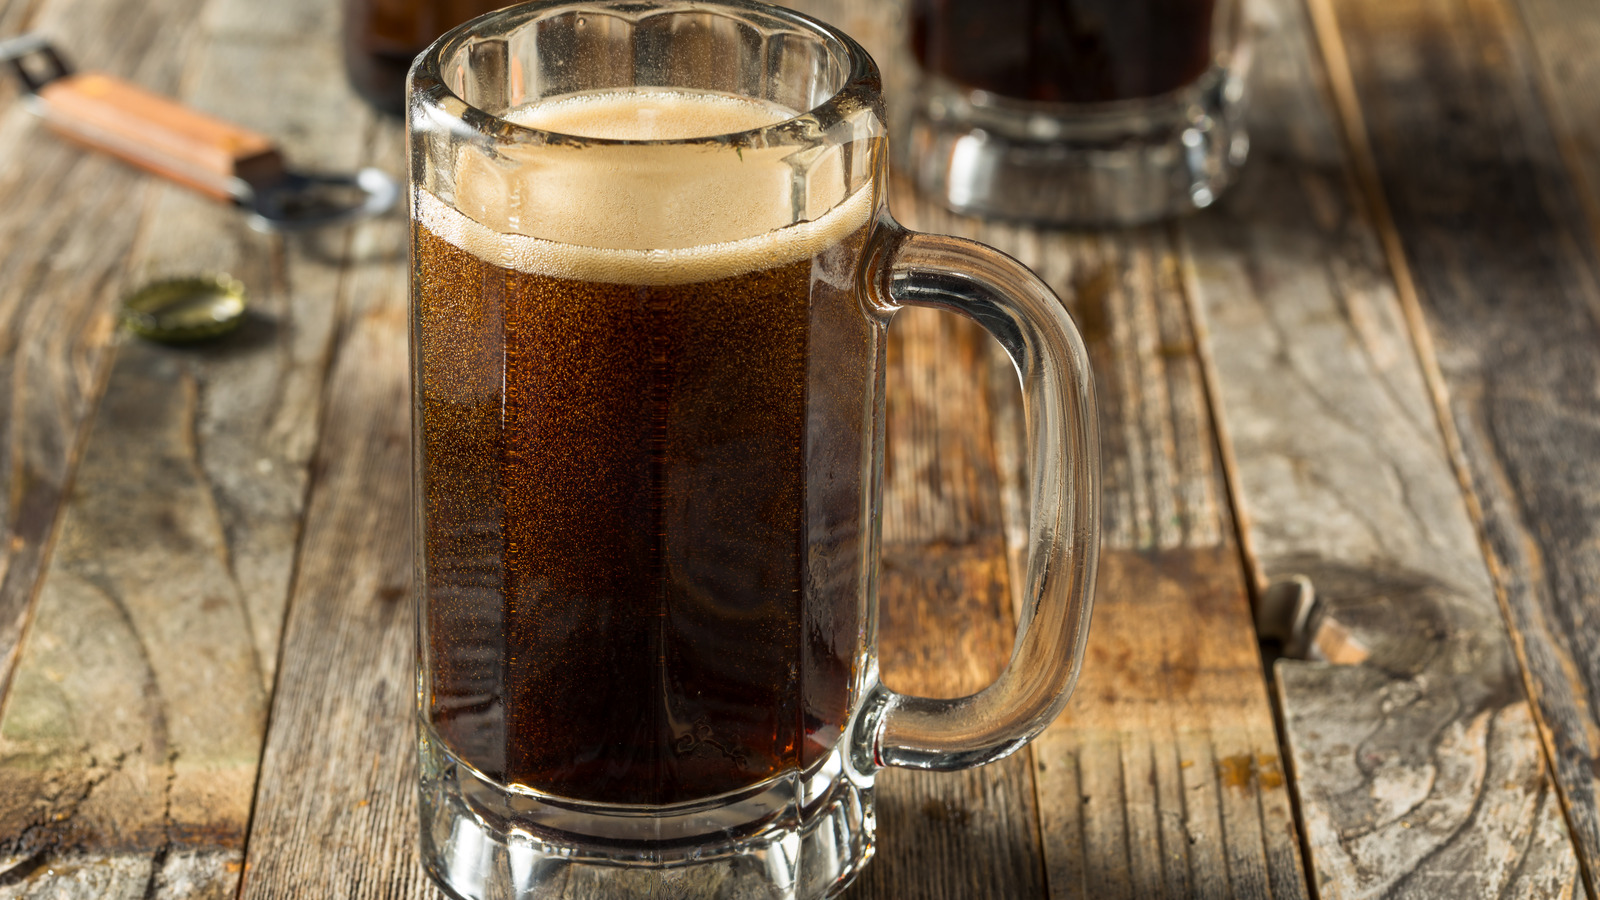 Why Culvers' Root Beer Tastes Different From All Other Brands